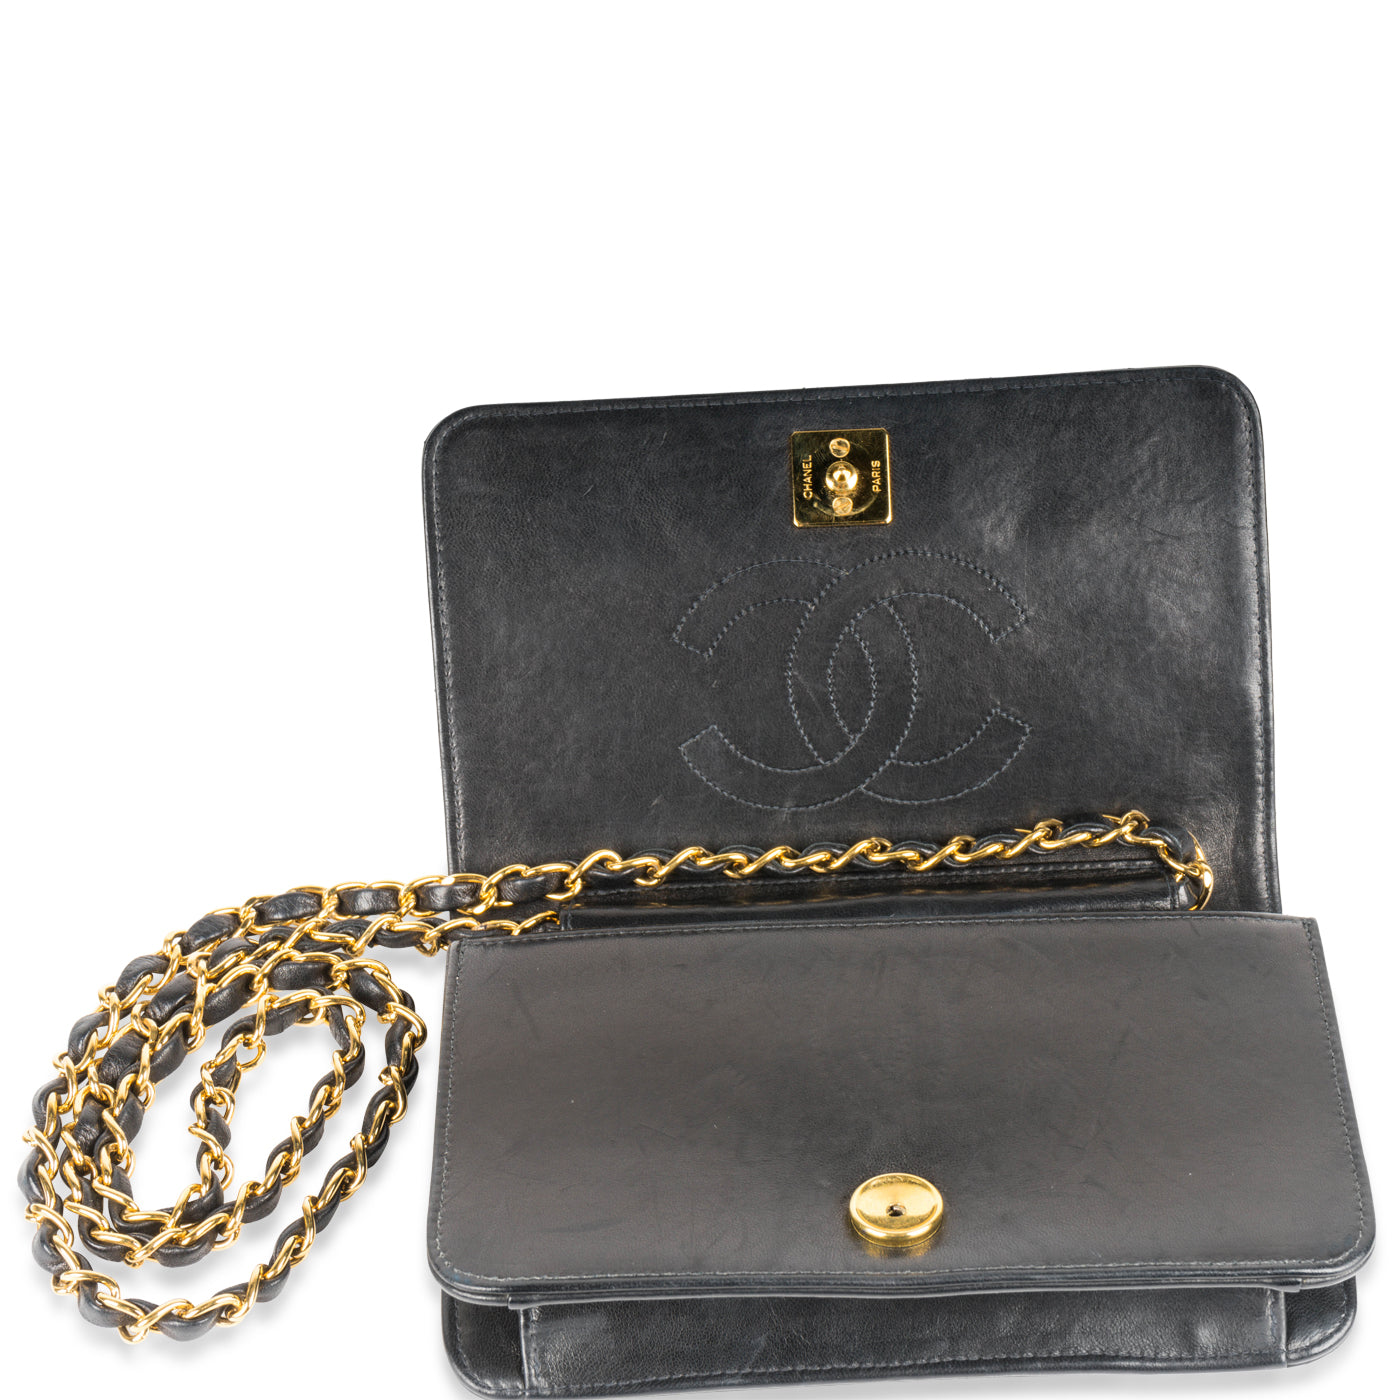 Chanel Vintage CC Bi-Fold Wallet on Chain Black - The Recollective